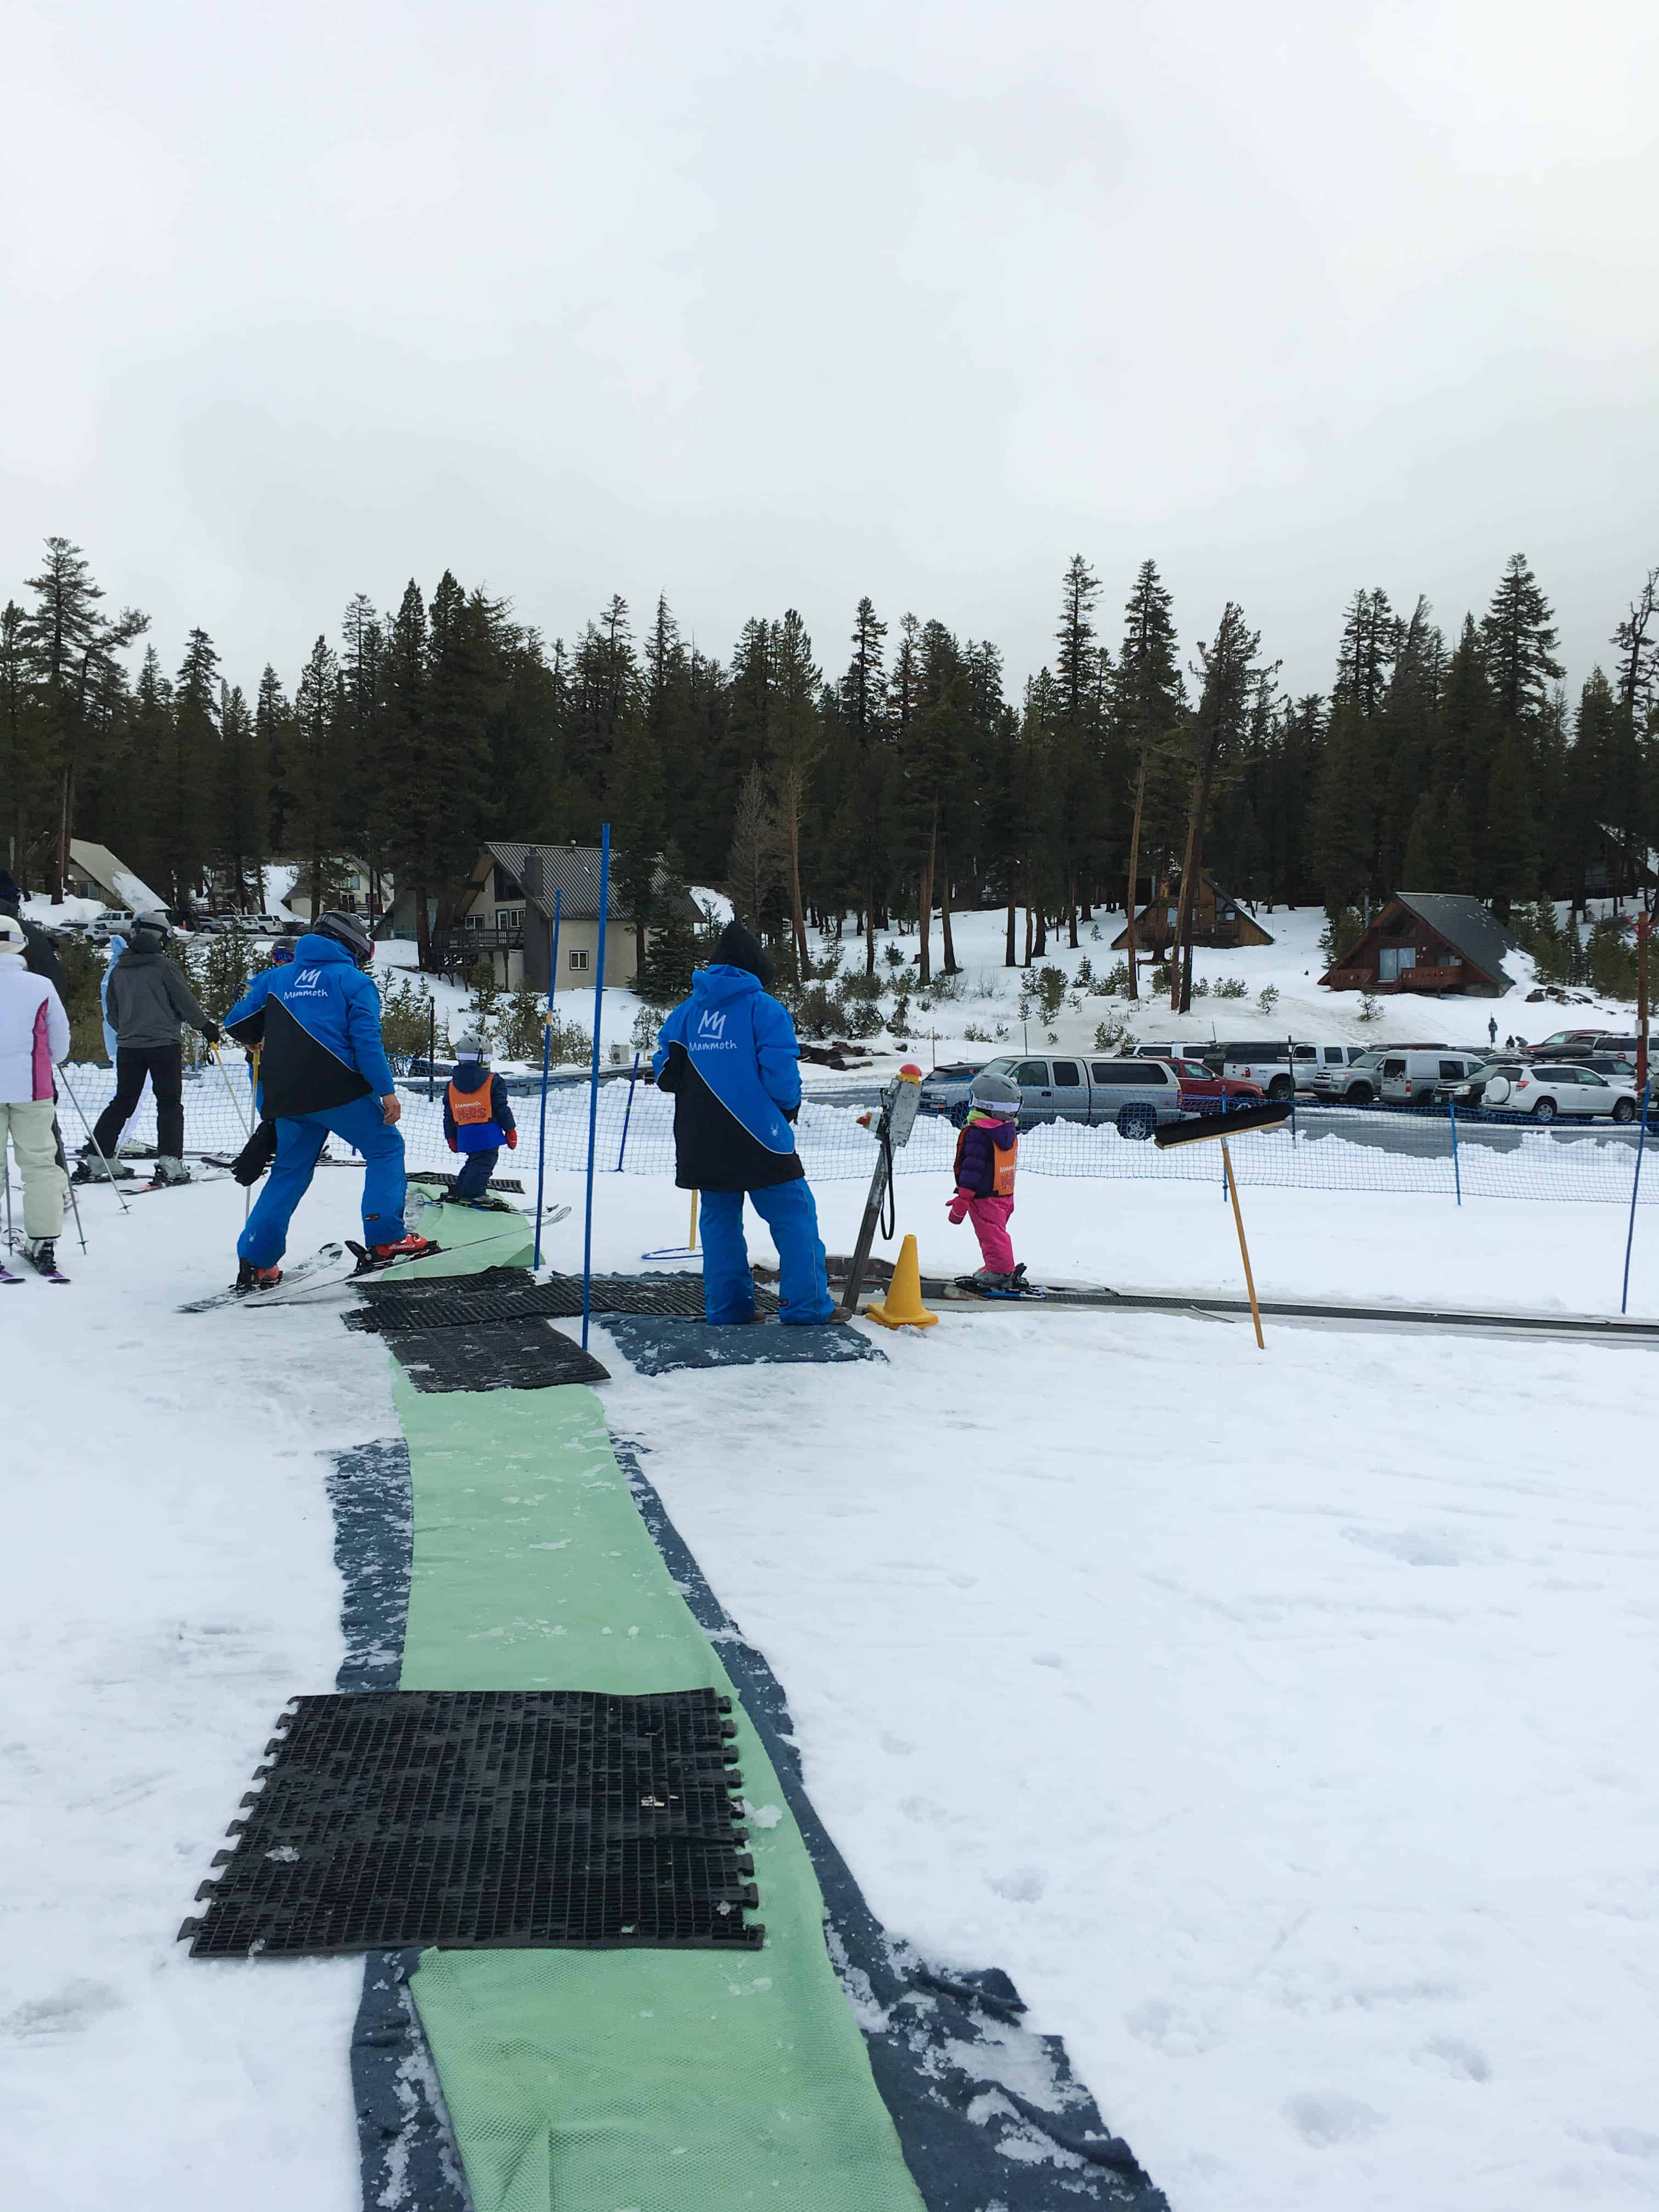 A short weekend trip to the Villages at Mammoth resort. Toddlers at ski school on the magic carpet.